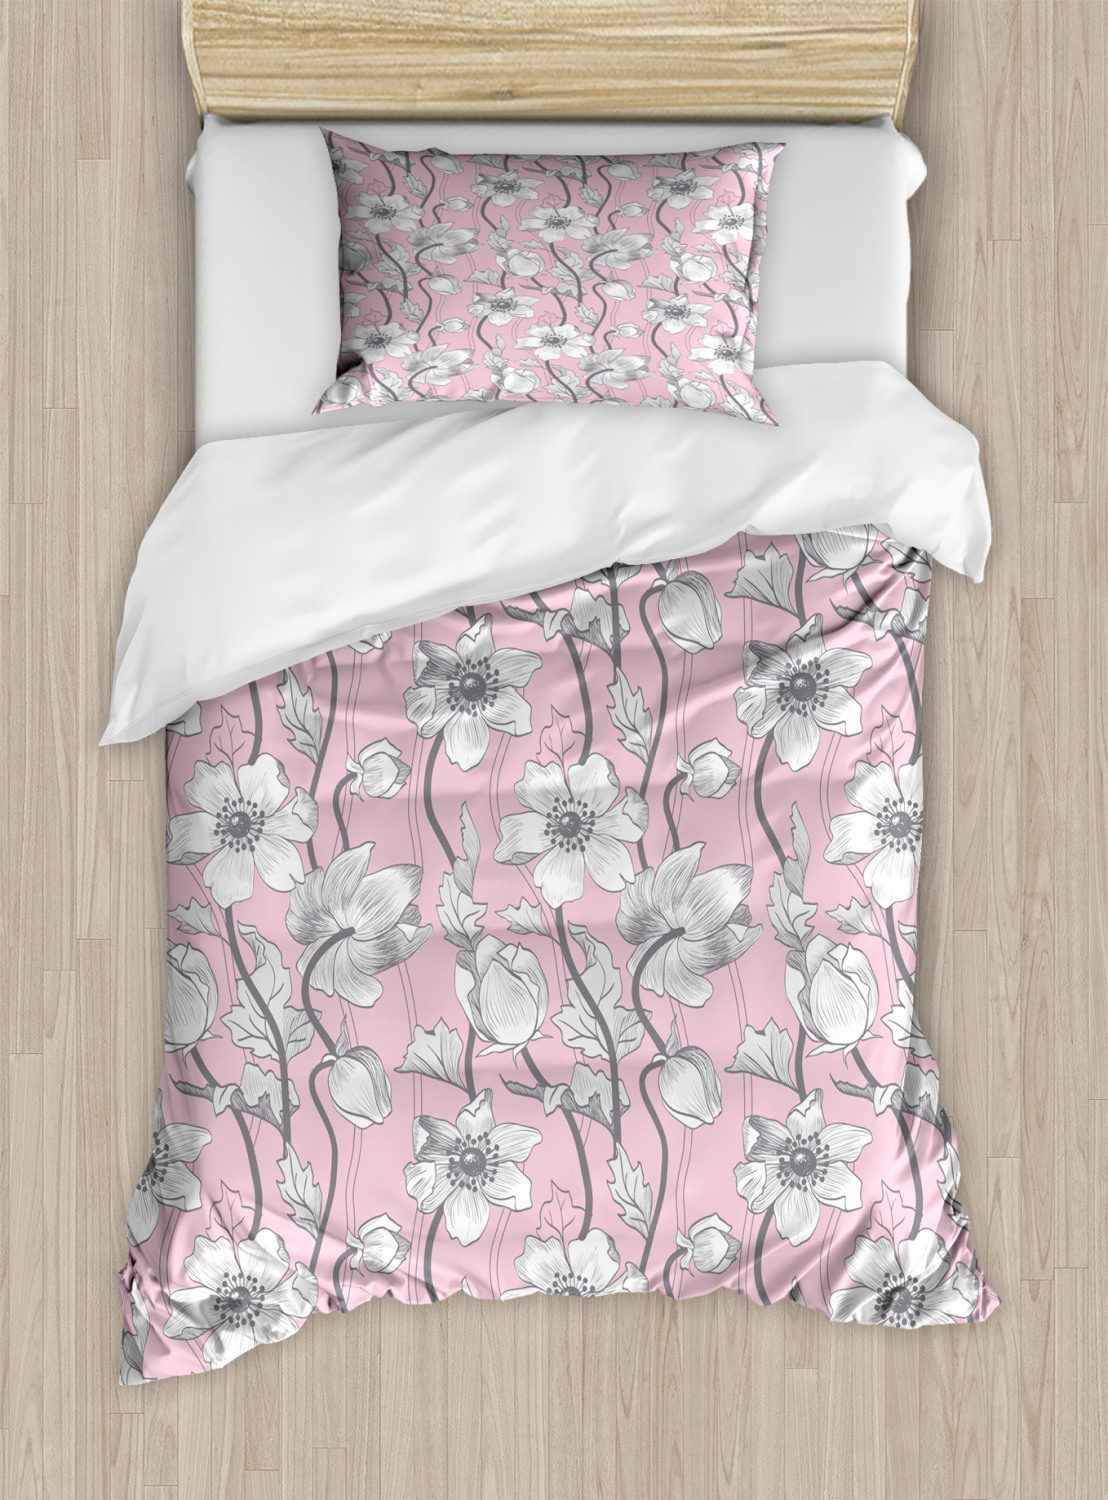 Pink and Grey Duvet Cover Set Twin Queen King Sizes with ...